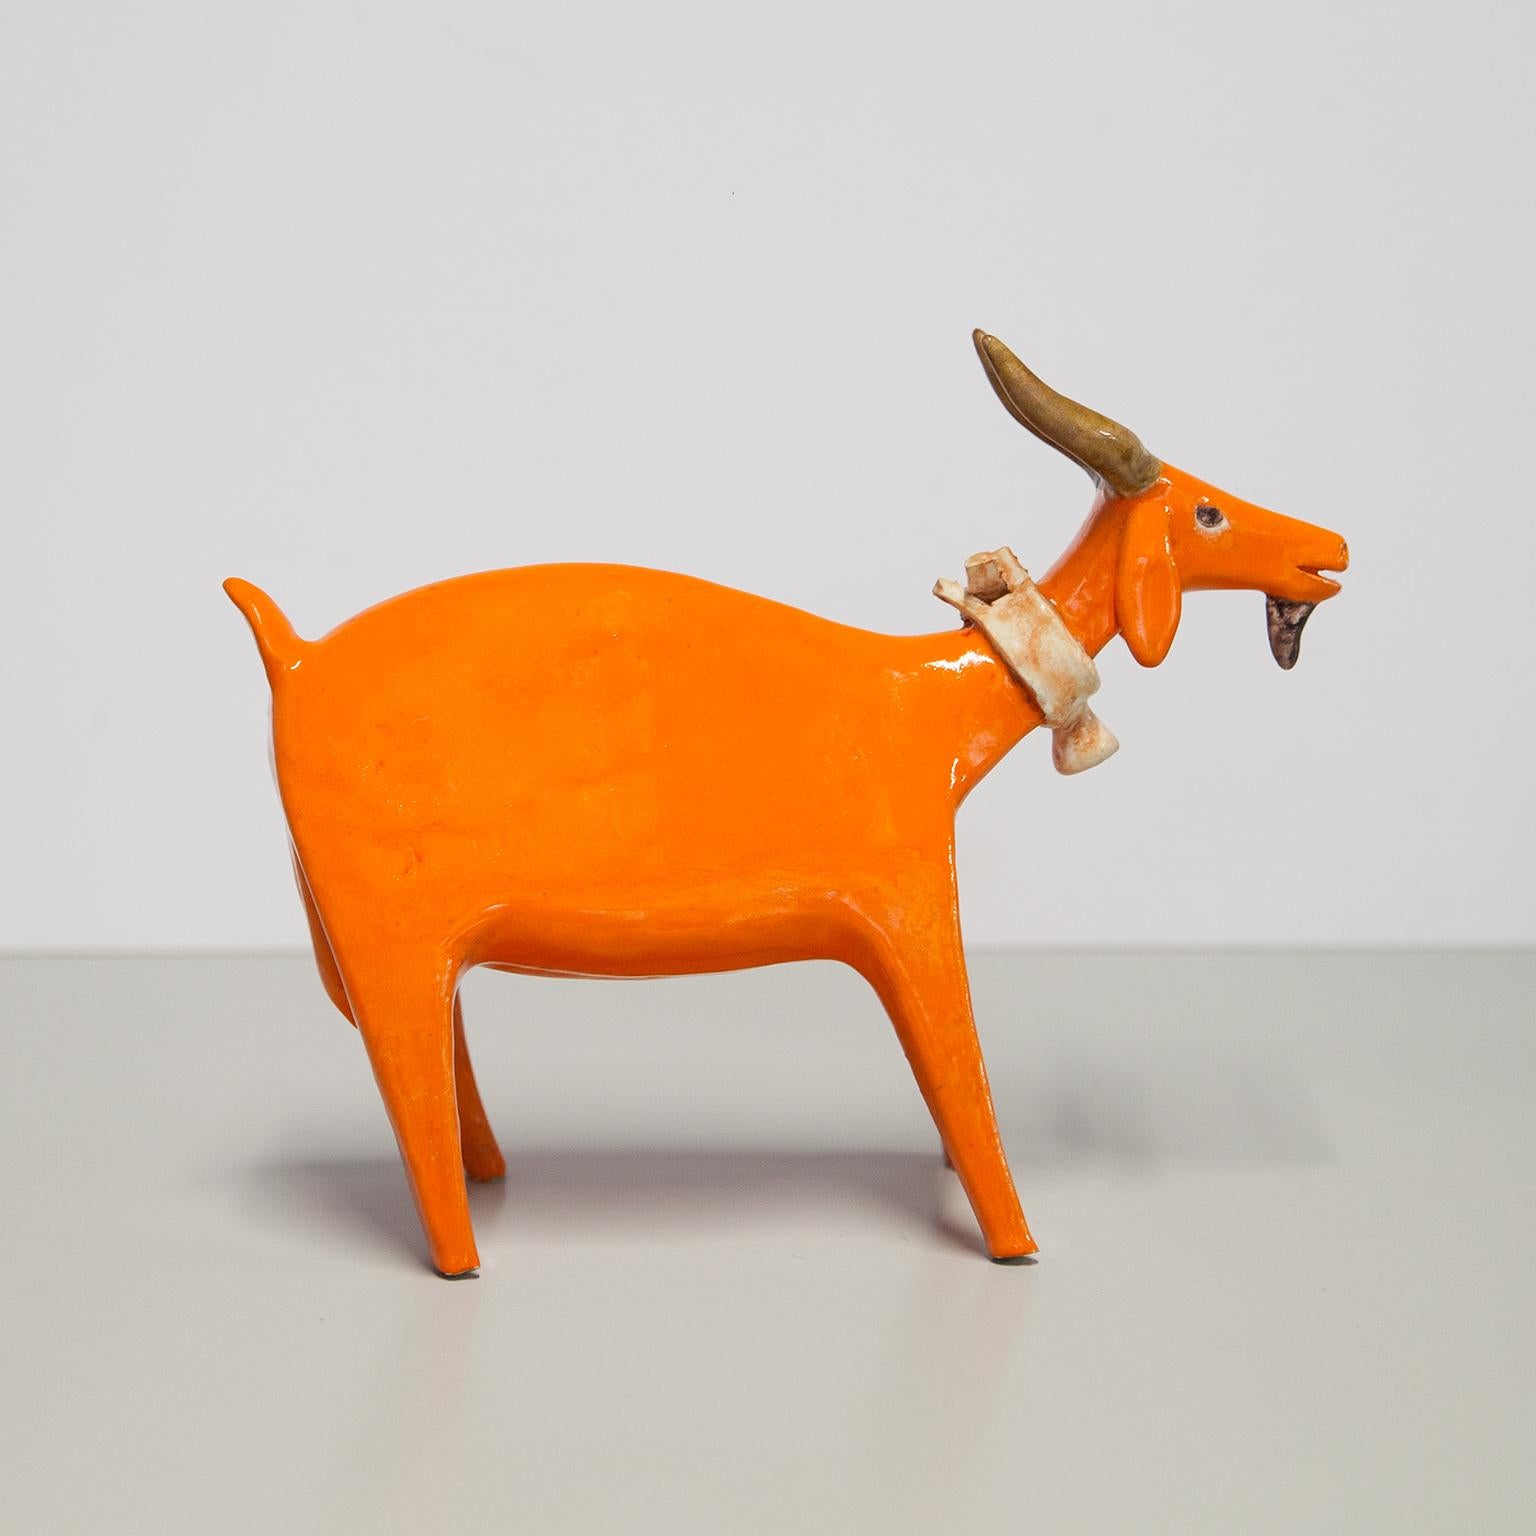 Orange glazed ceramic goat made by Bruno Gambone in the 1970s, signed Gambone Italy on the bottom. Very rare to find in the glazed orange design and in excellent condition.